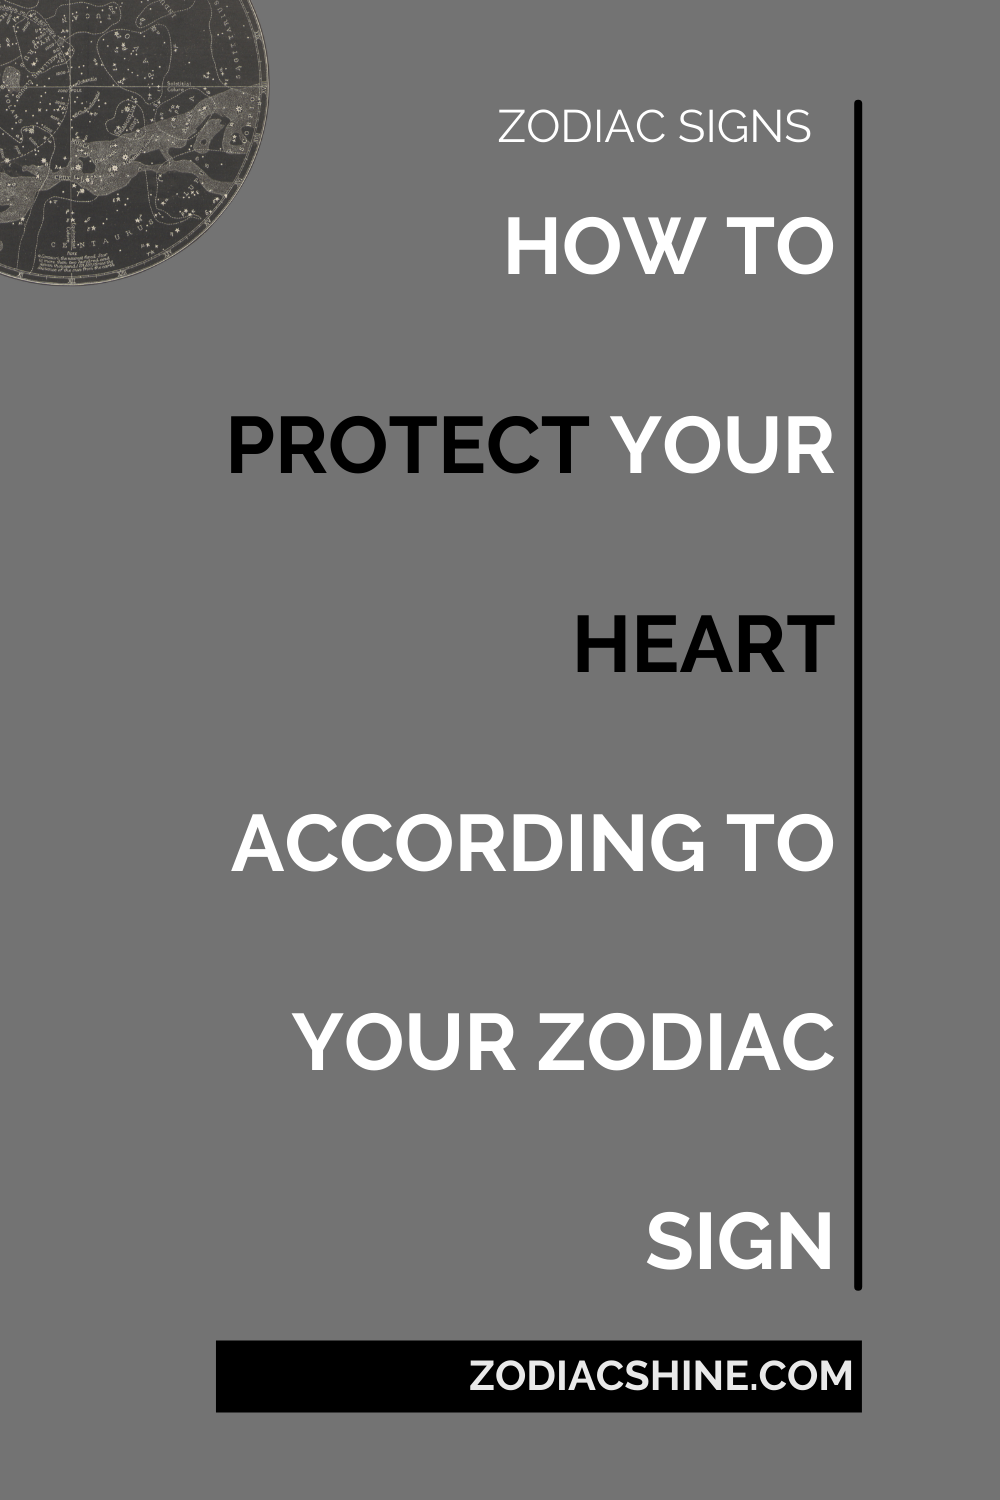 HOW TO PROTECT YOUR HEART ACCORDING TO YOUR ZODIAC SIGN